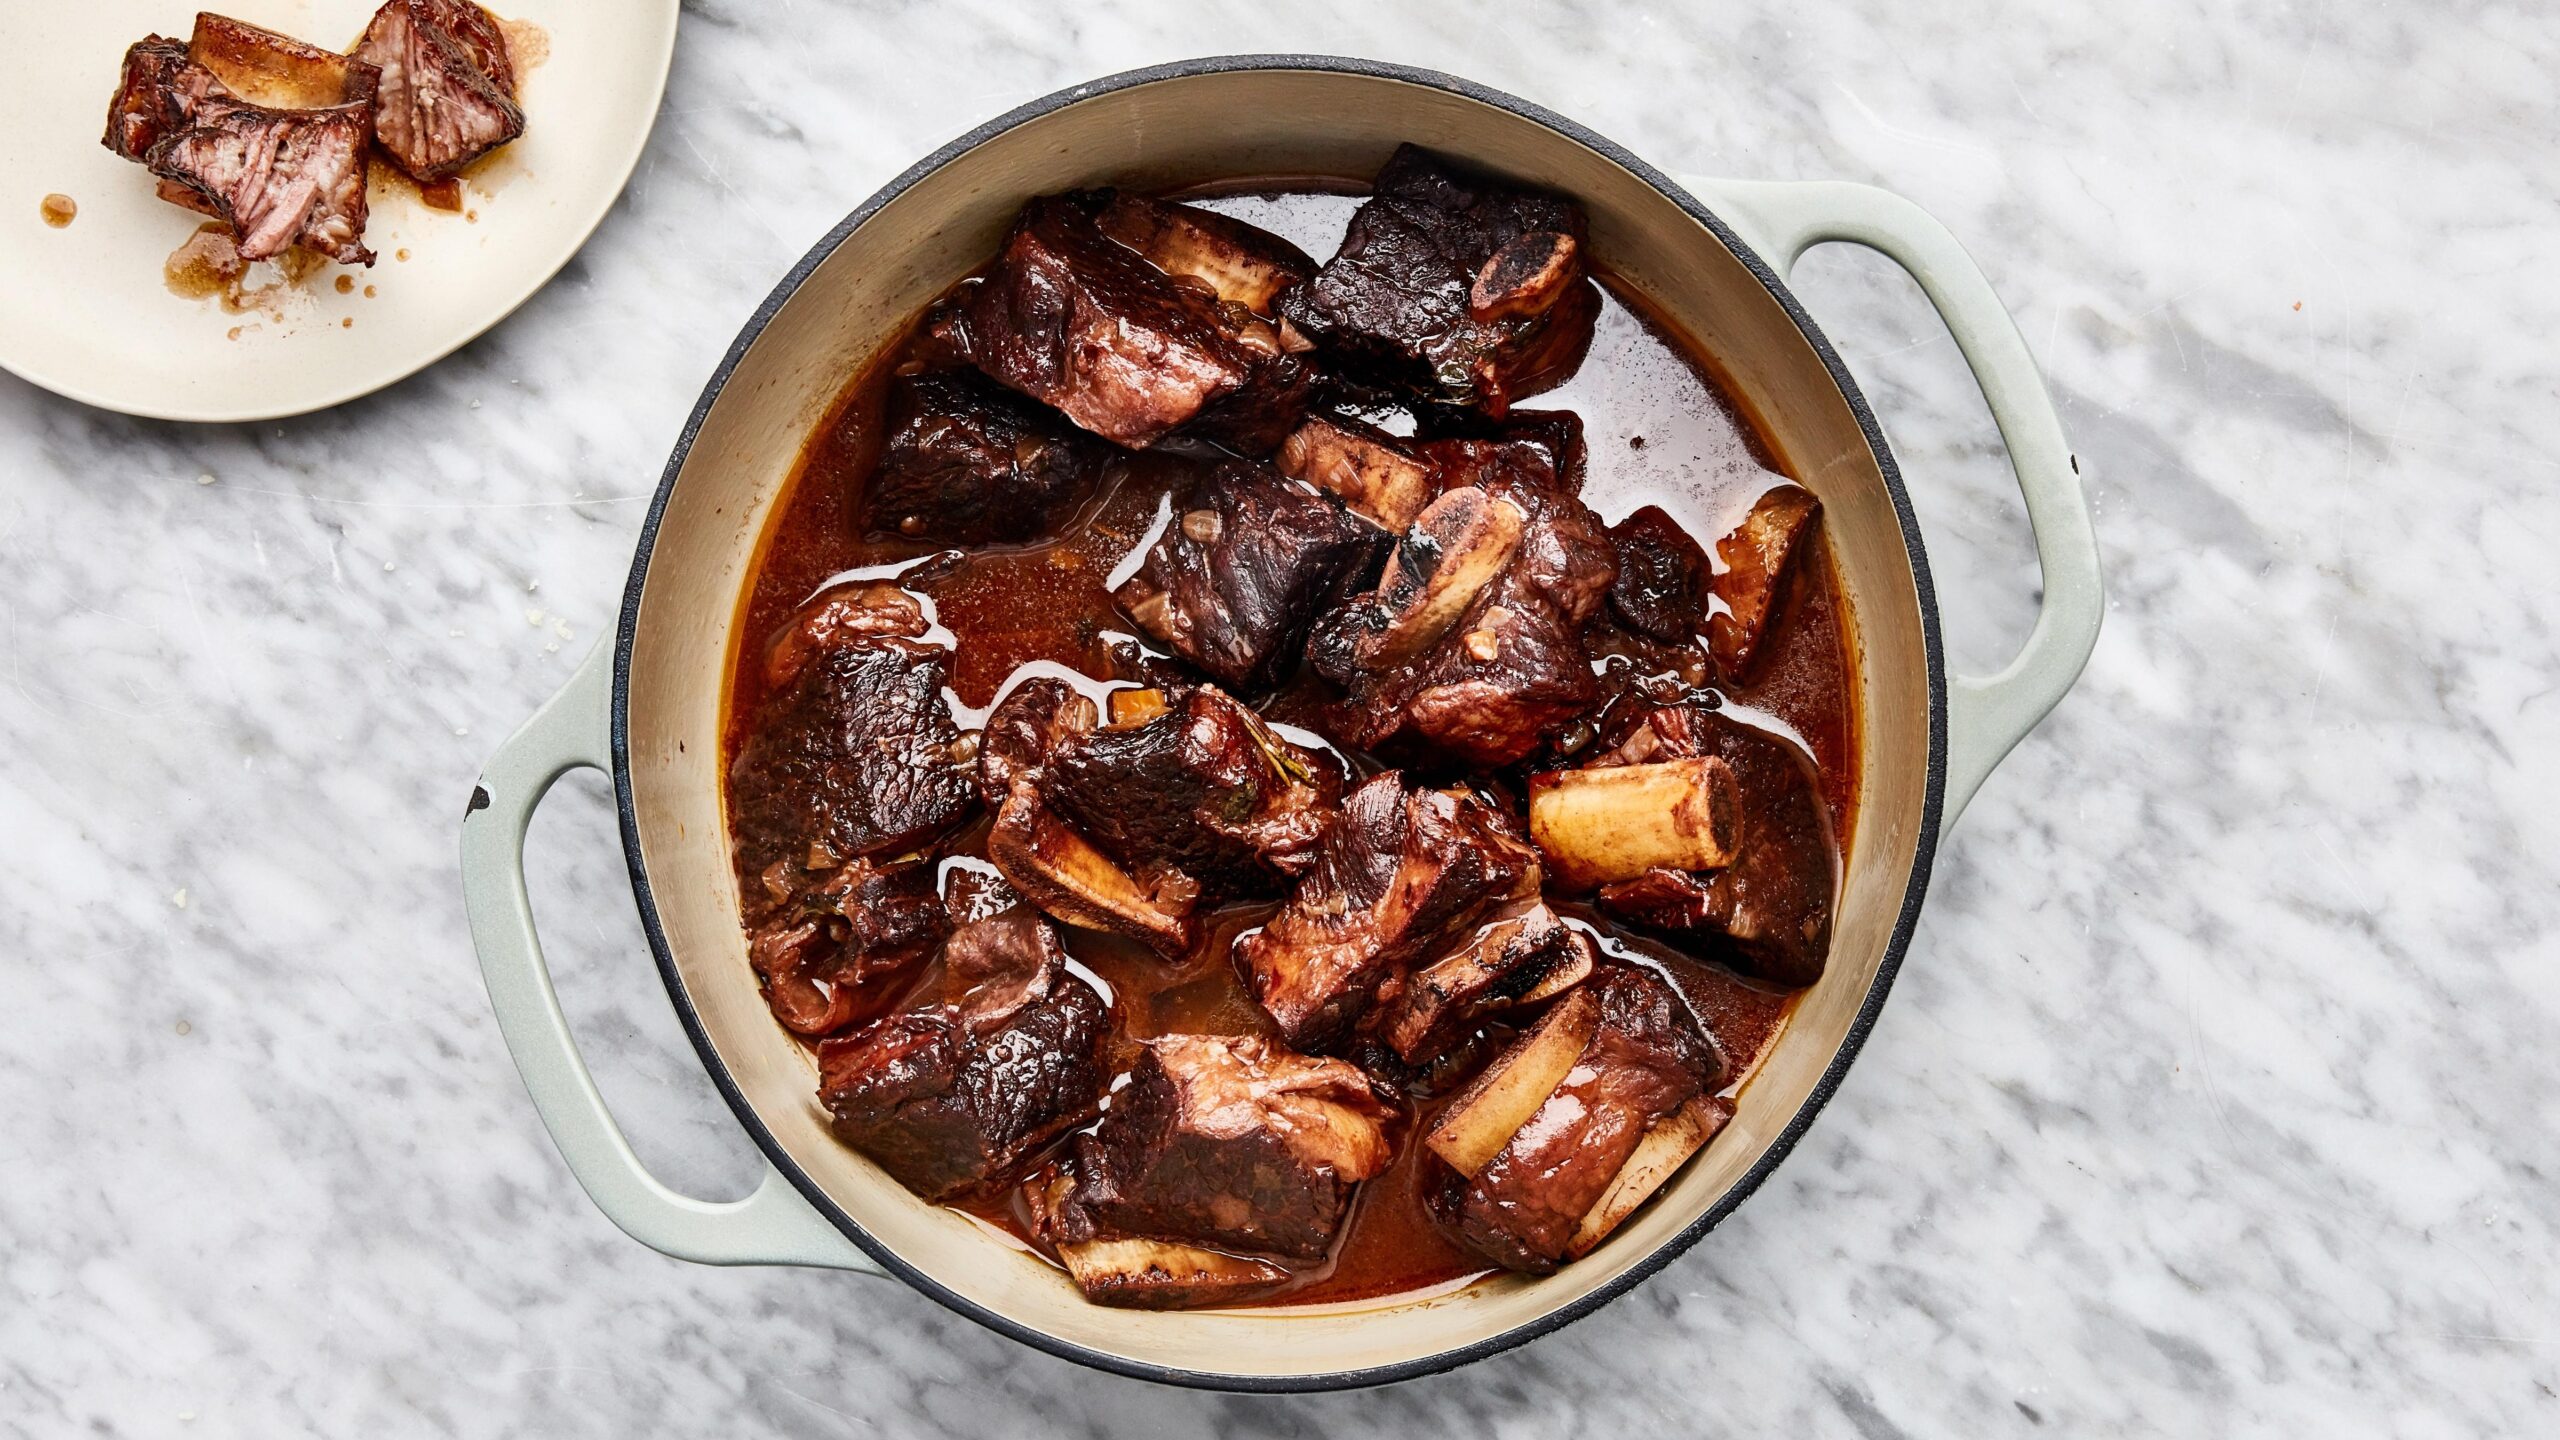  Fall-off-the-bone tender: Braised Short Ribs in Red Wine recipe